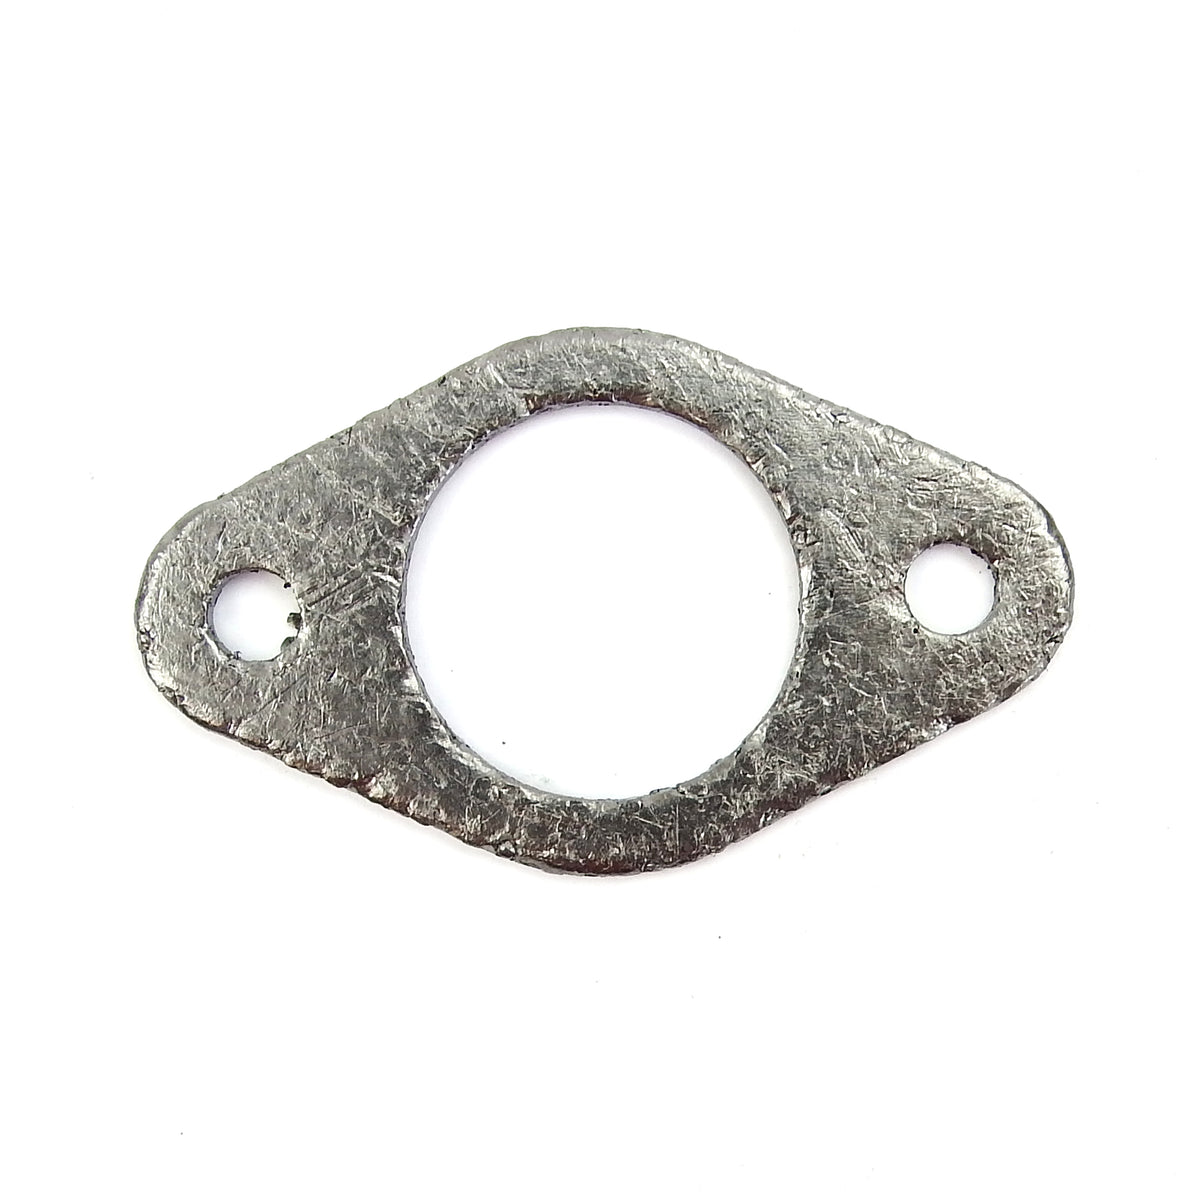 Gasket - Exhaust - 48mm Between Hole Centres - 27mm Bore